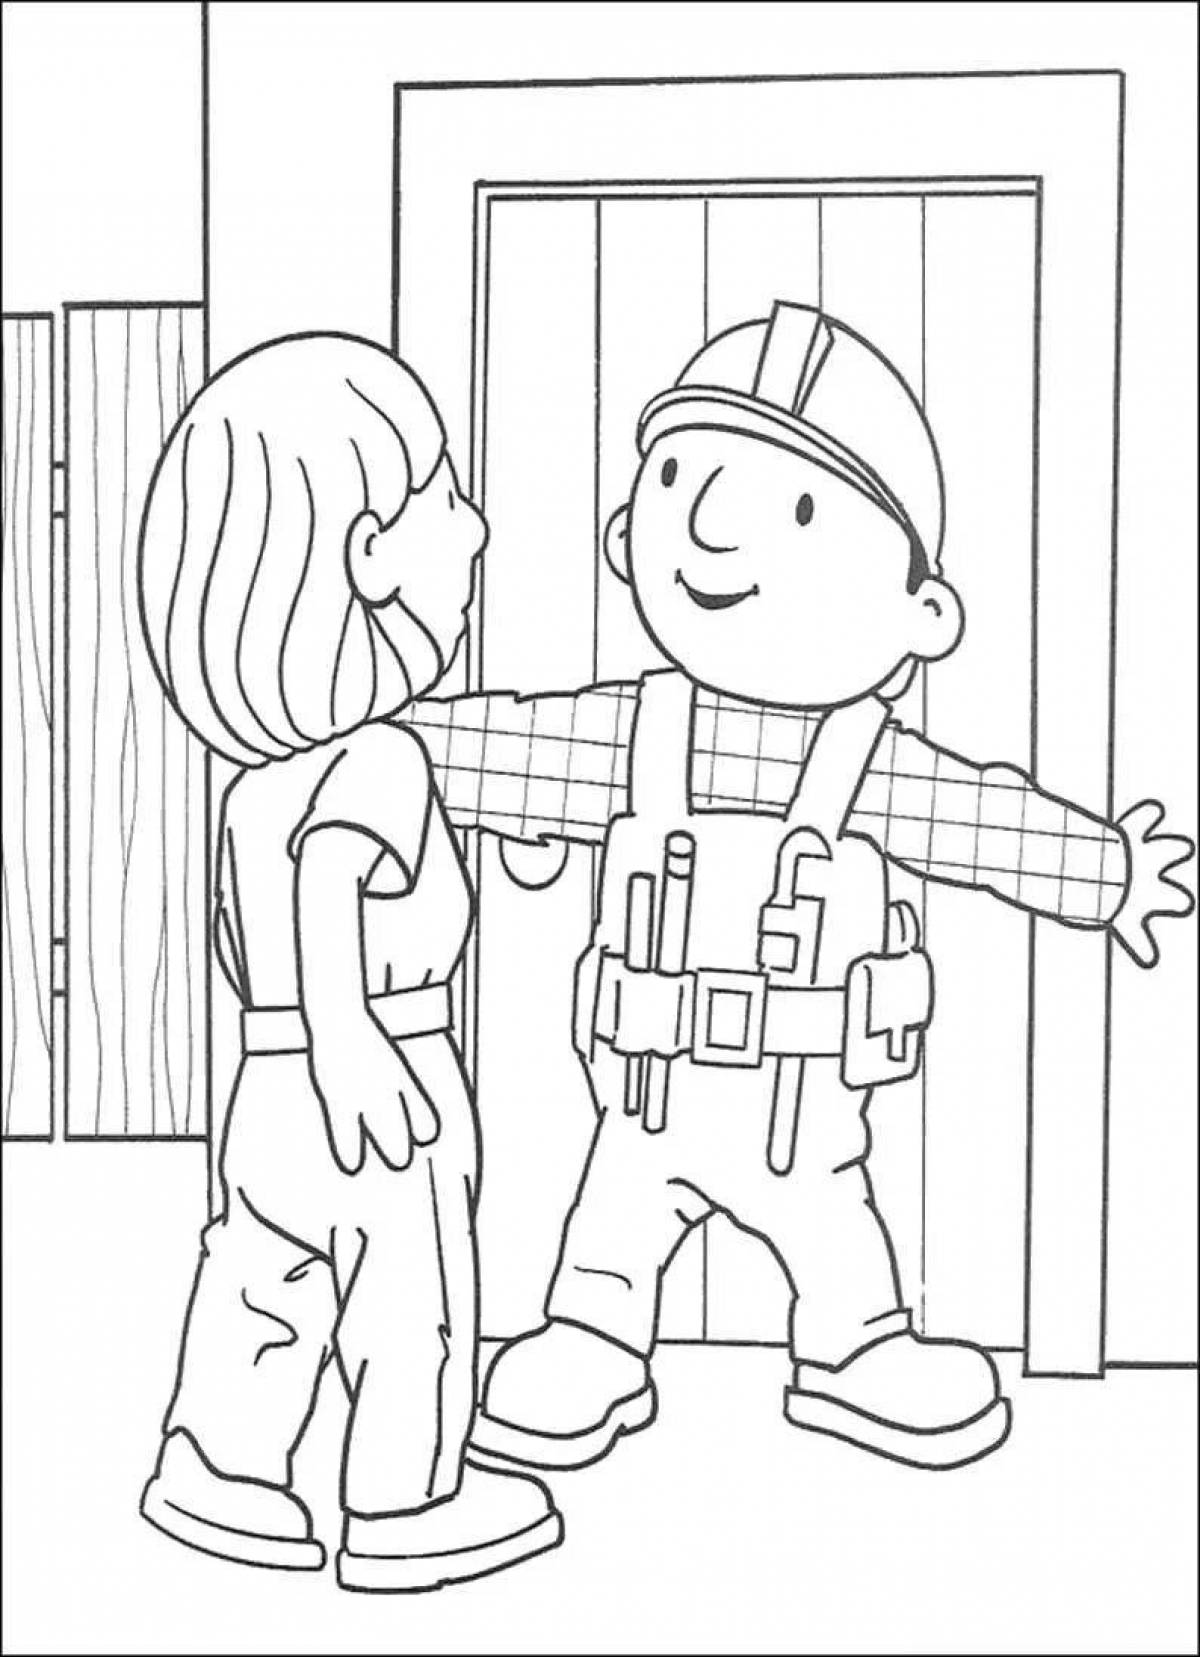 Color-frenzy home alone safety coloring page